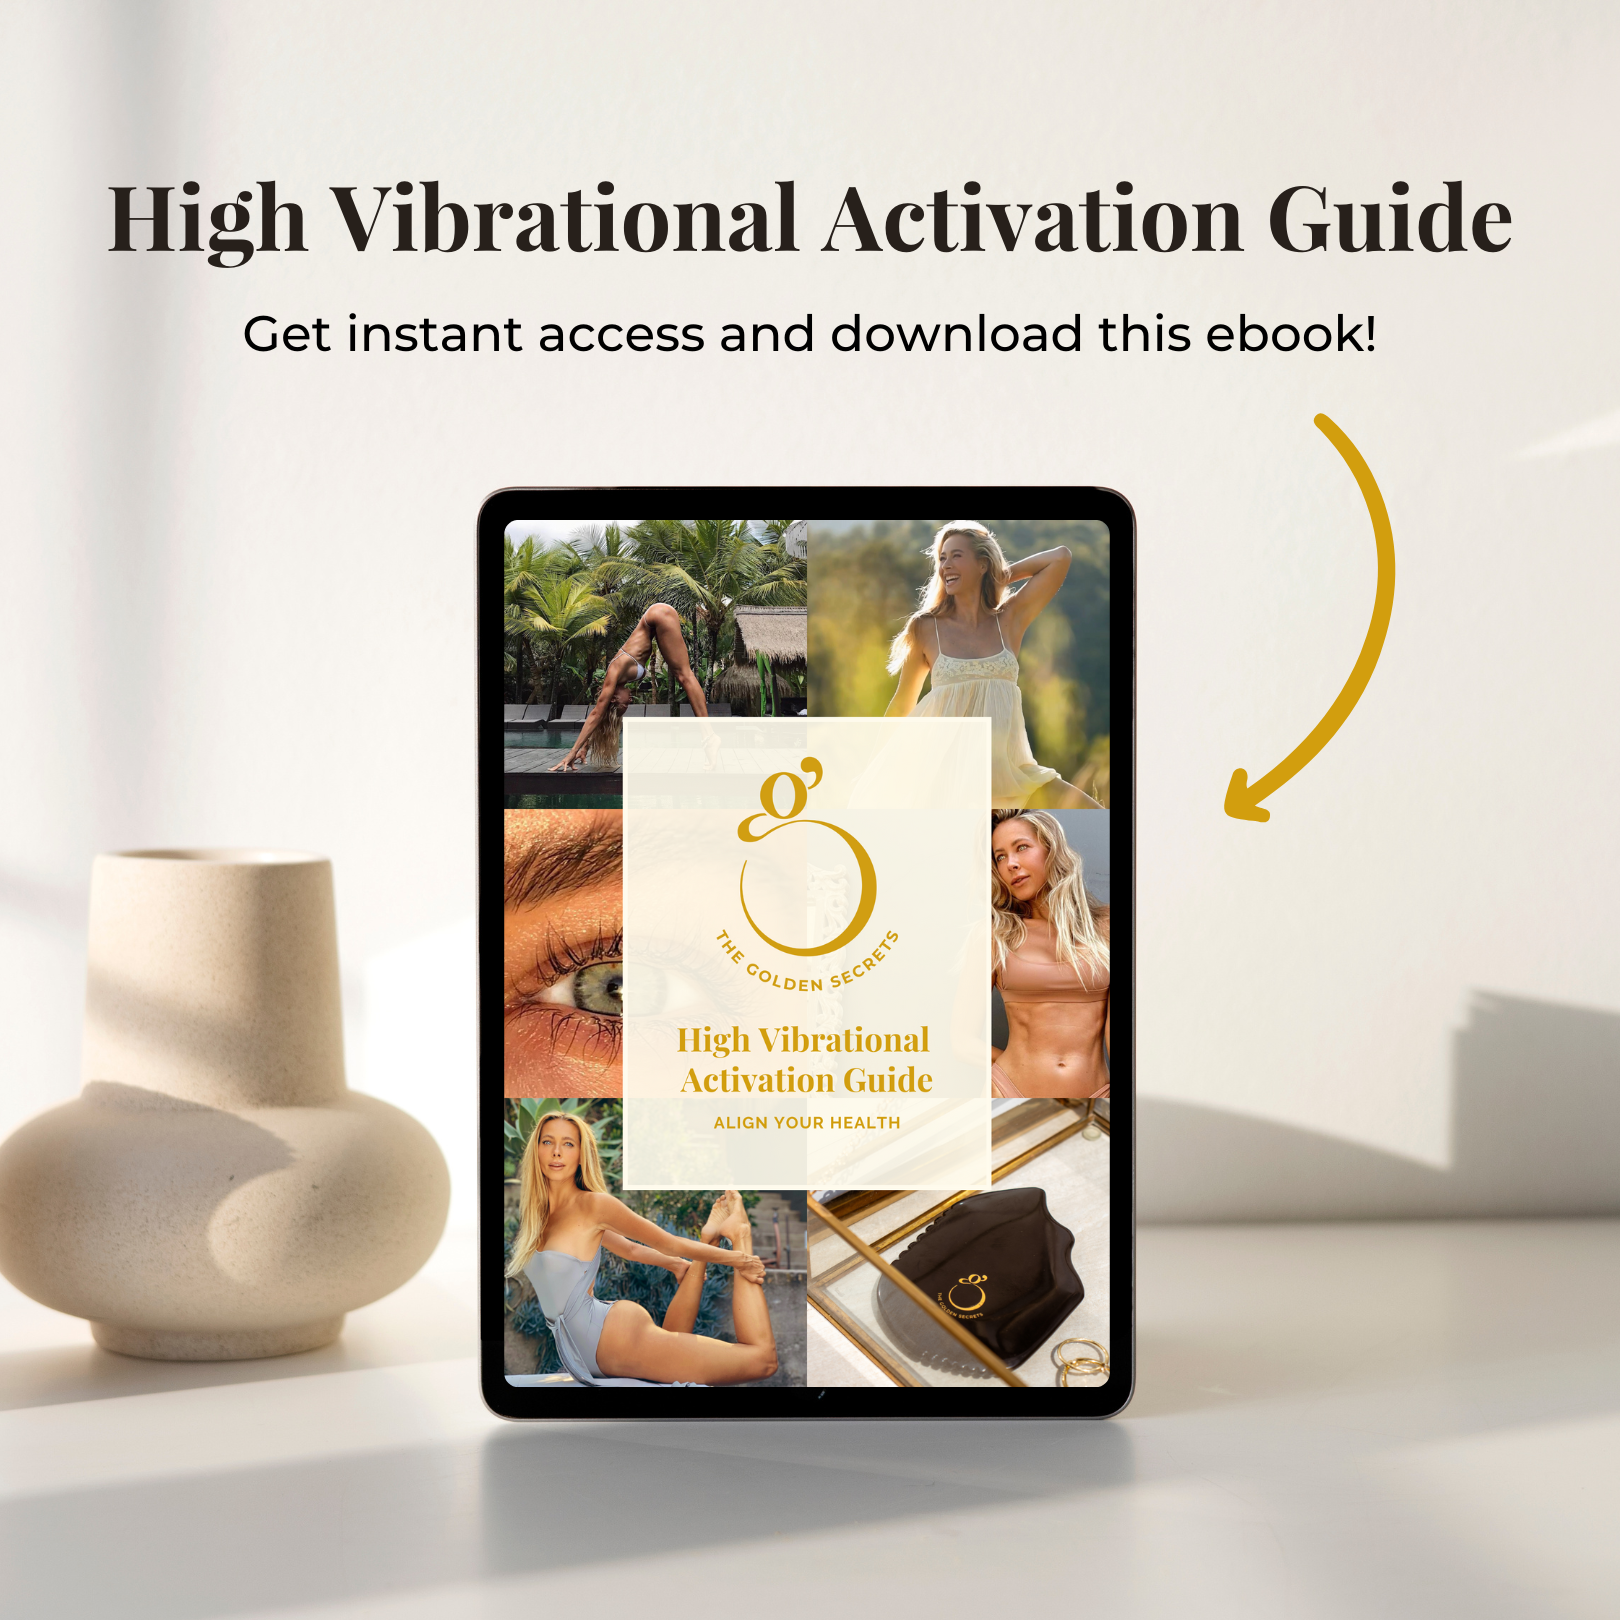 High Vibrational Activation Guide